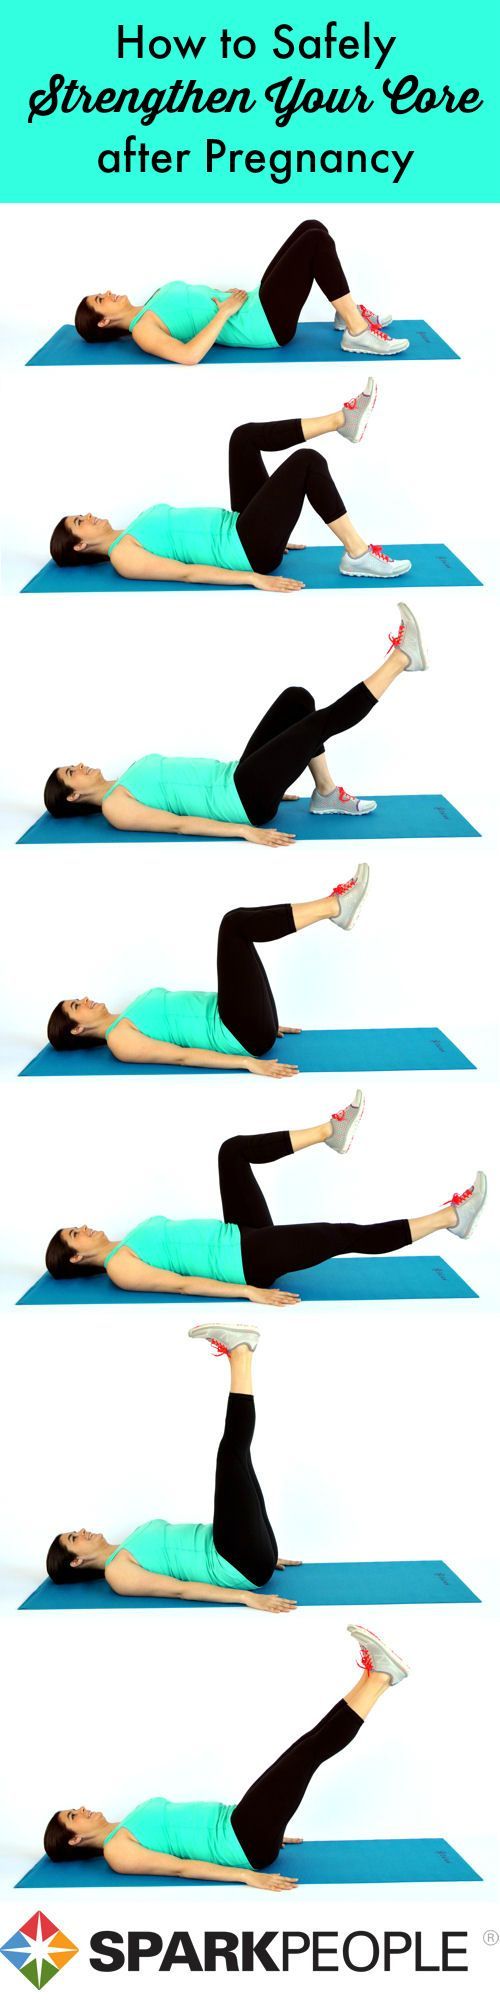 Crunches are one of the worst exercises you can do after pregnancy! In fact, there is a specific series of moves catered just for